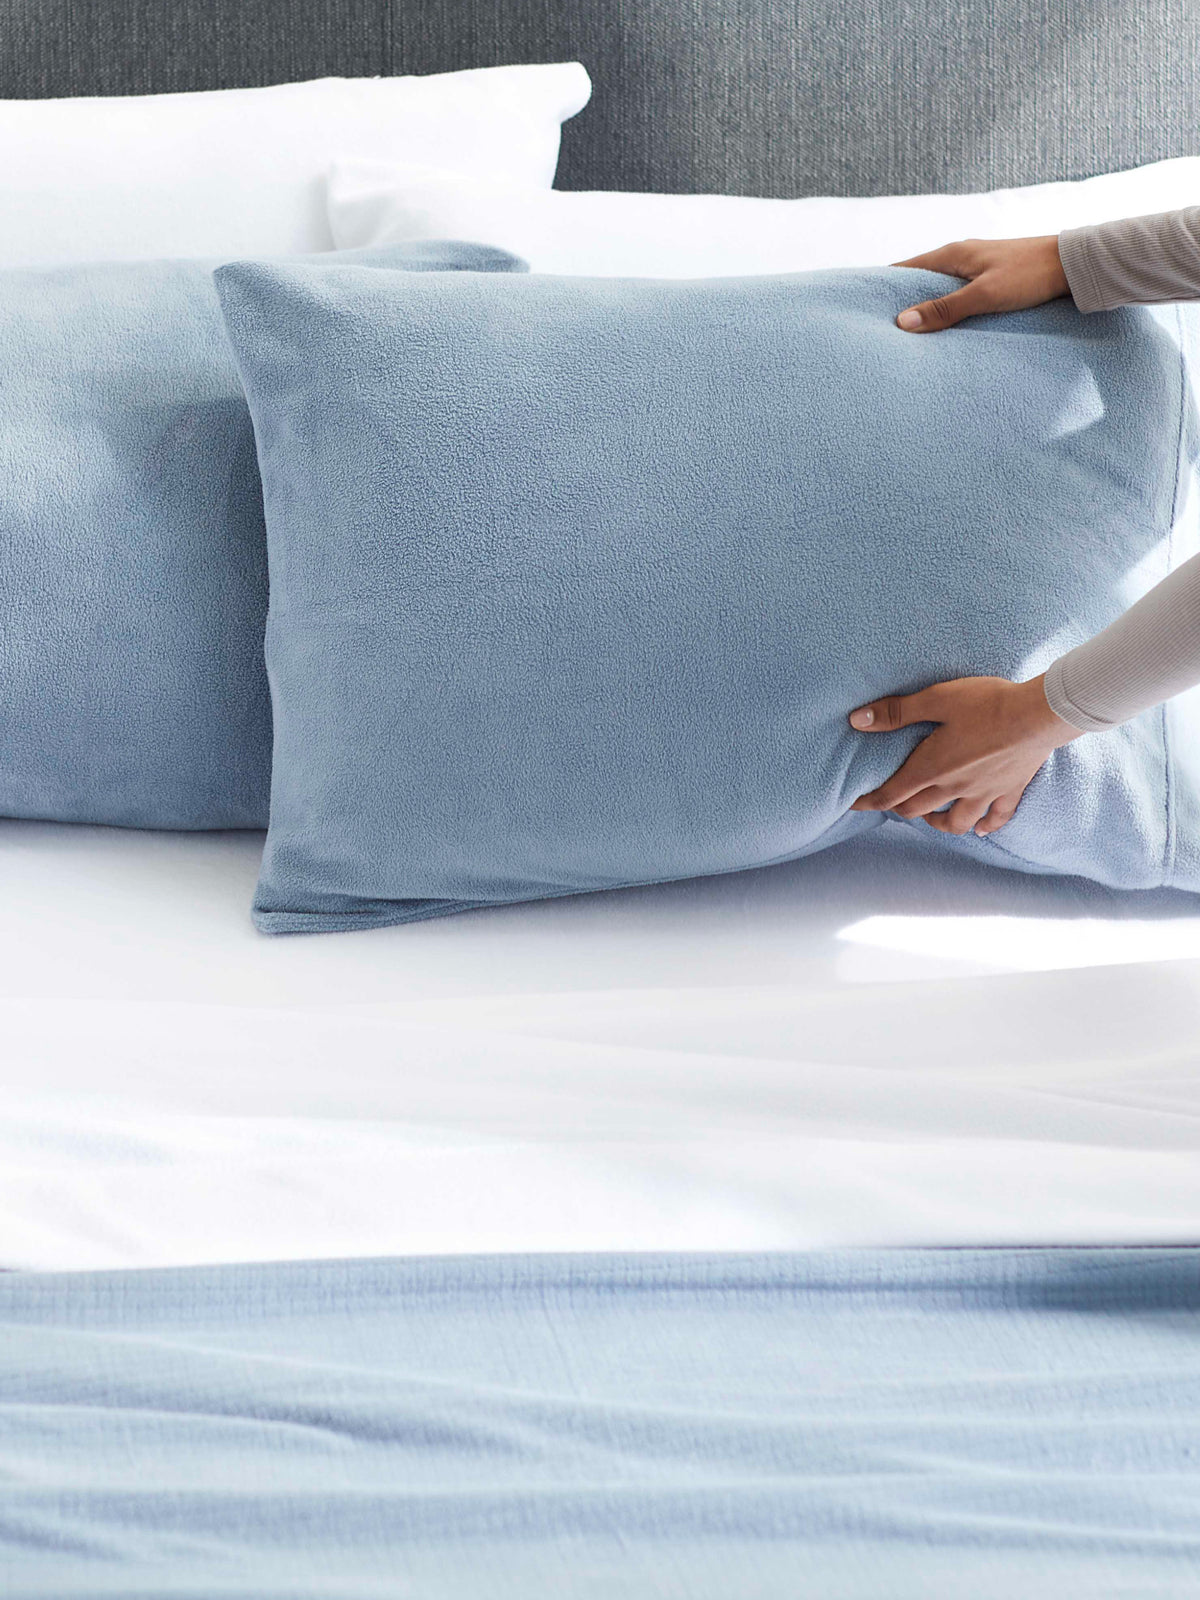 Sheets colleciton image featuring our Microfleece Sheets in Polar Blue.